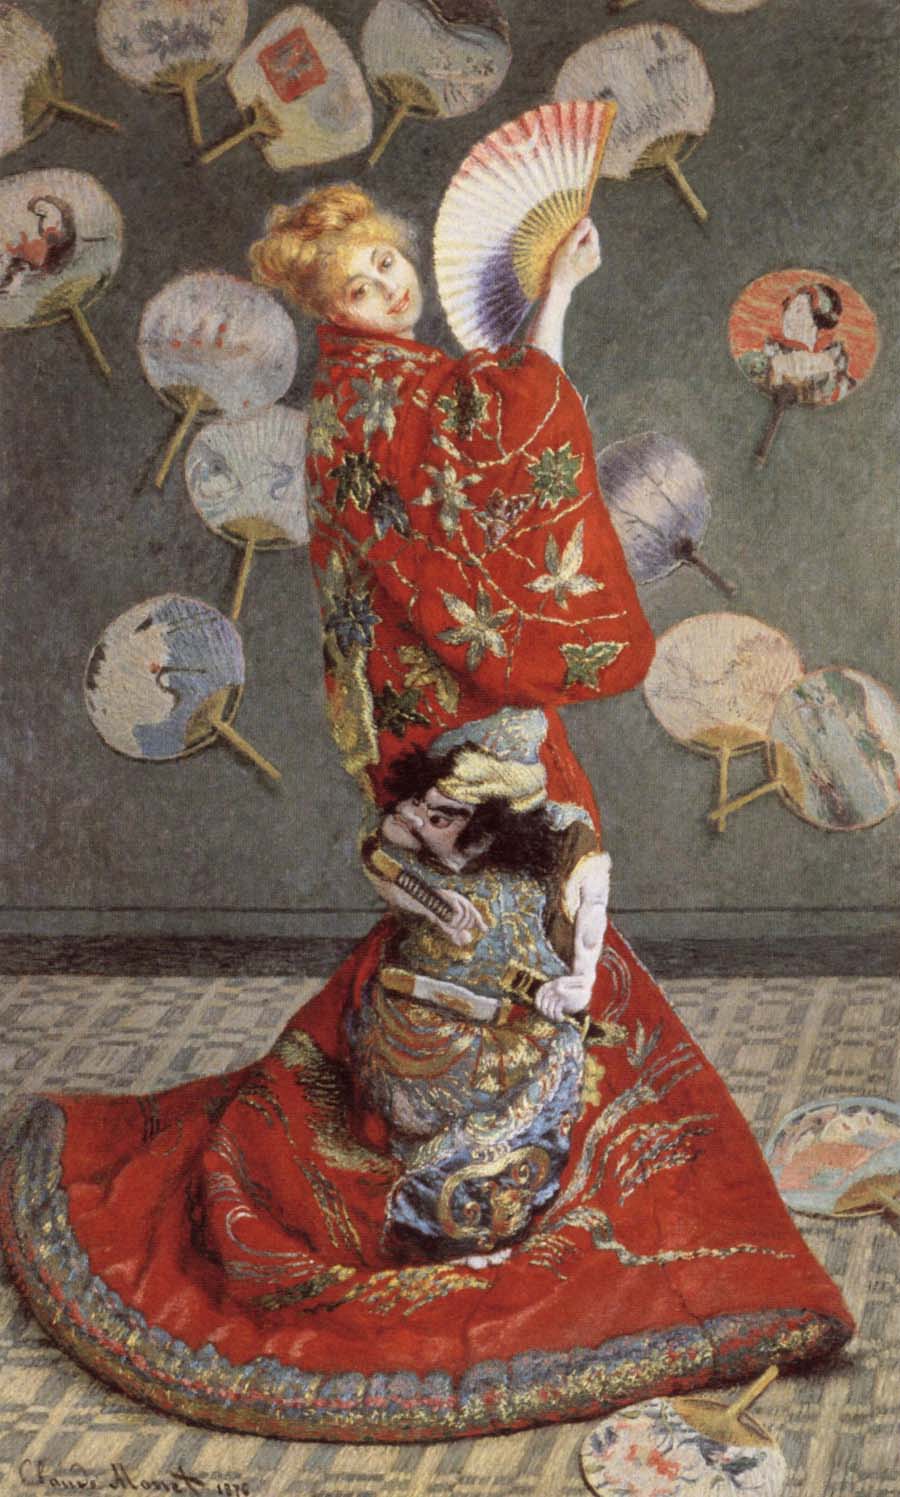 Madame Monet in Japanese Costume